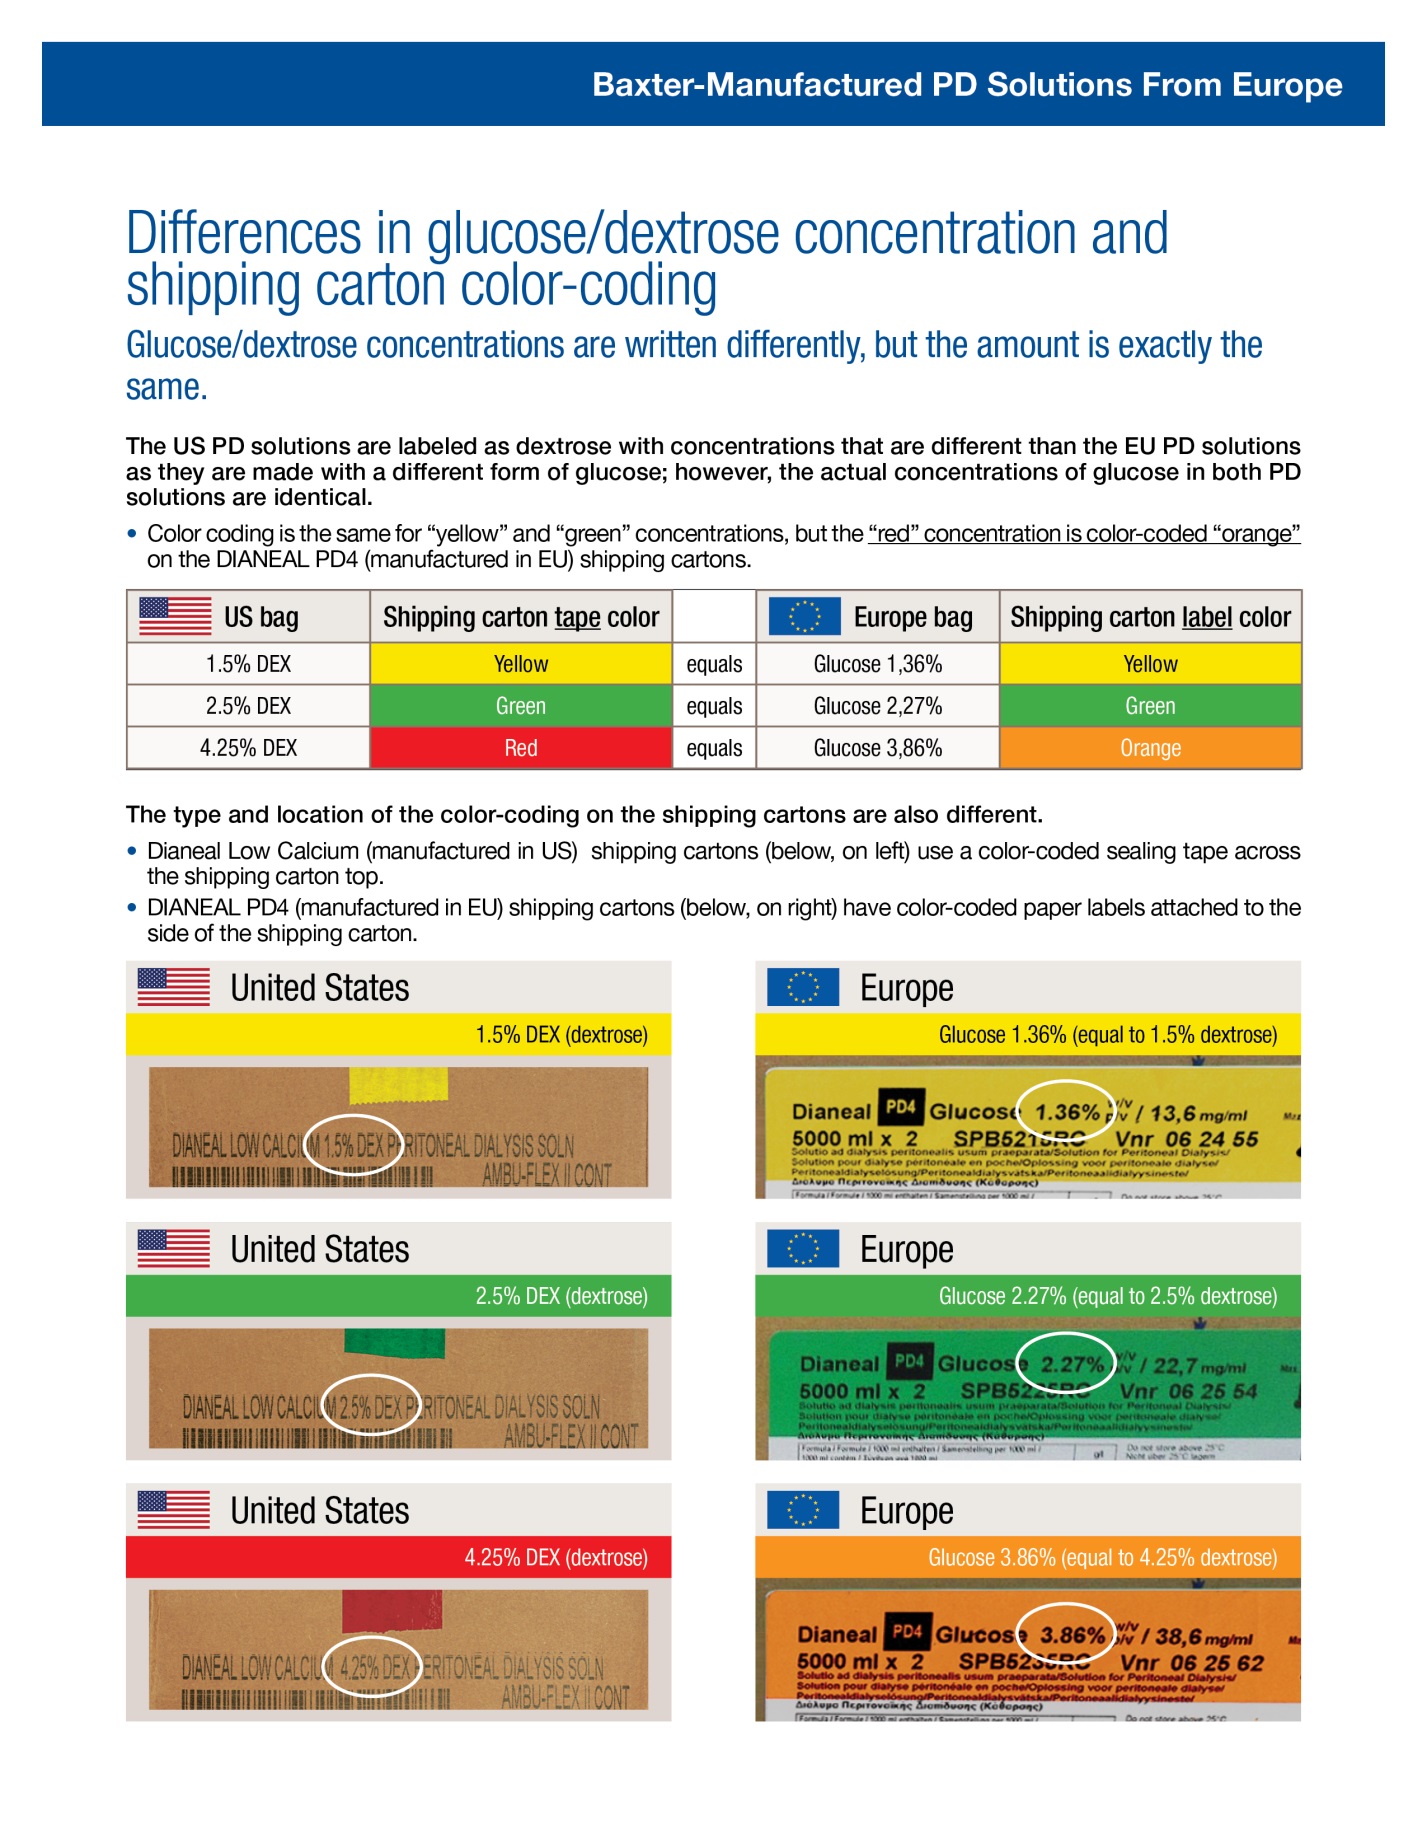 Differences in glucose/dextrose concentration and shipping carton color-coding